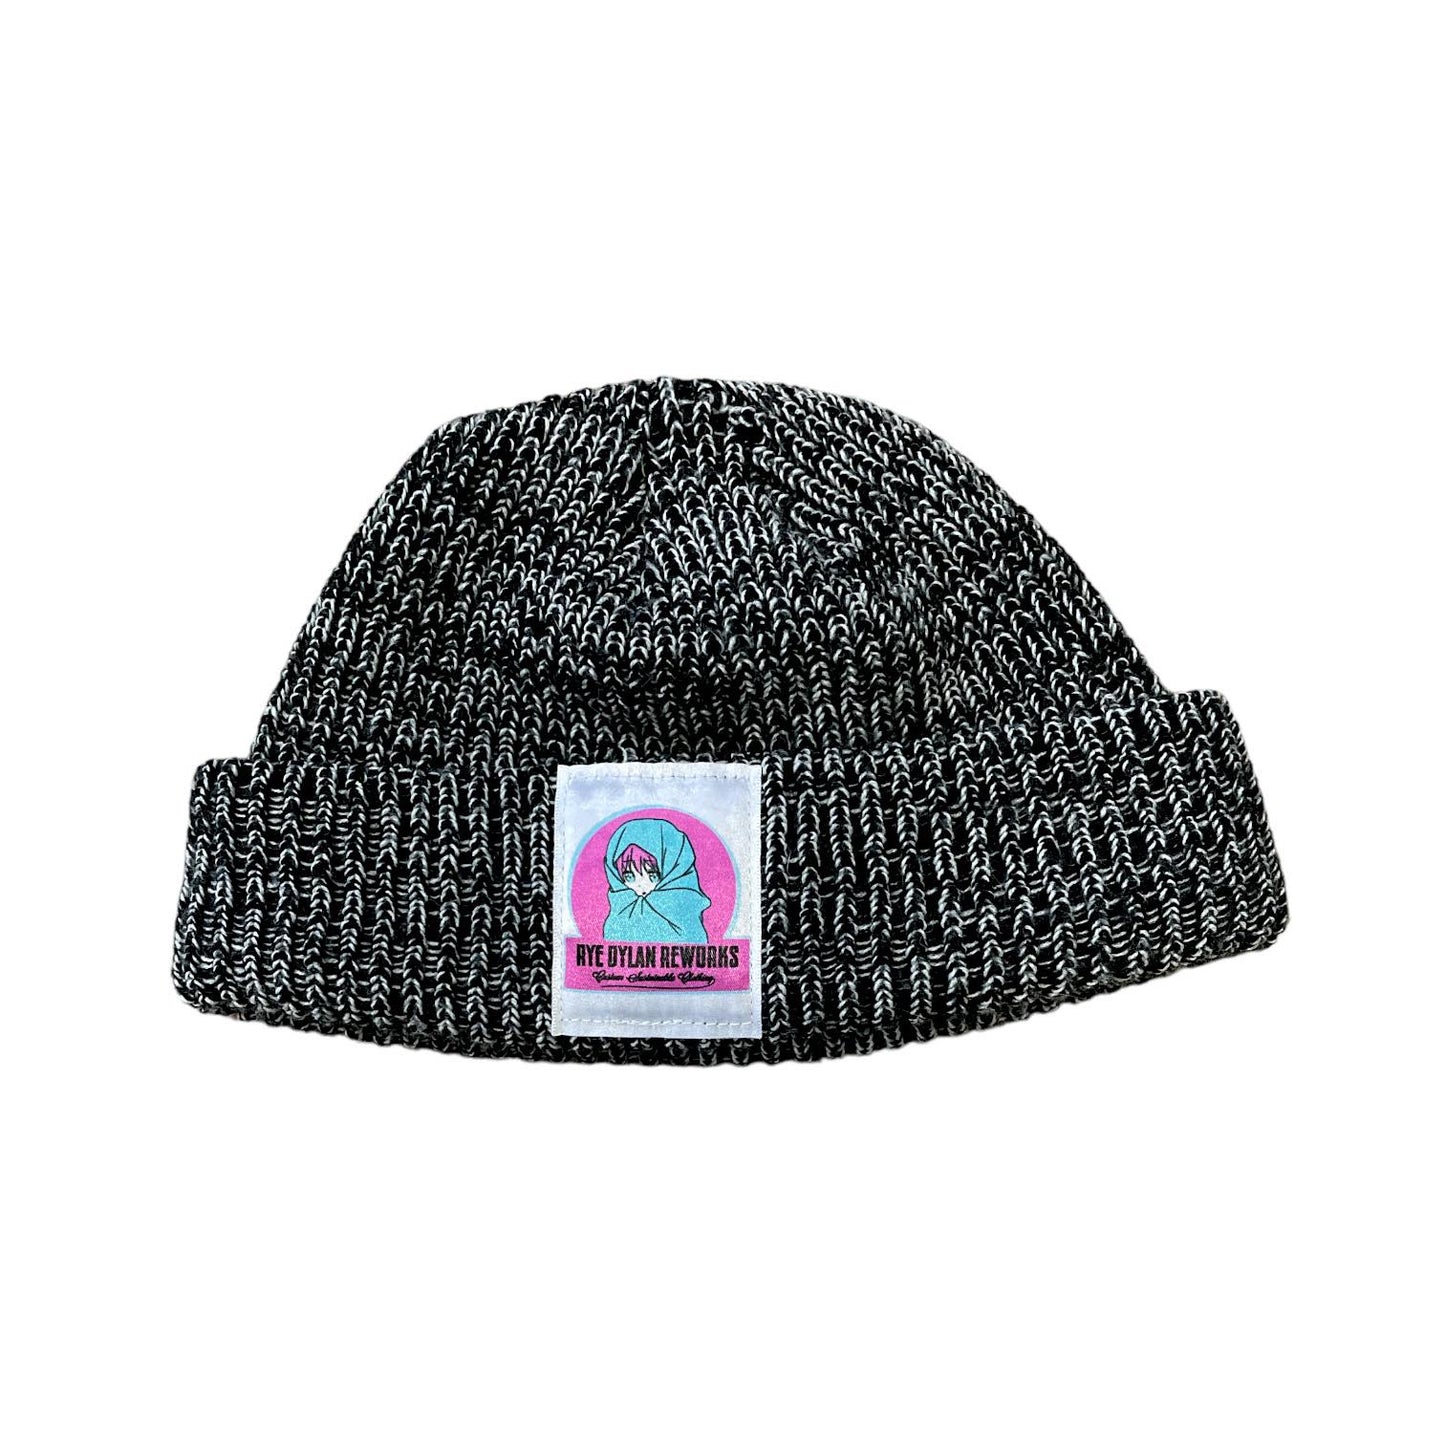 1OF1 REWORKED TOQUES